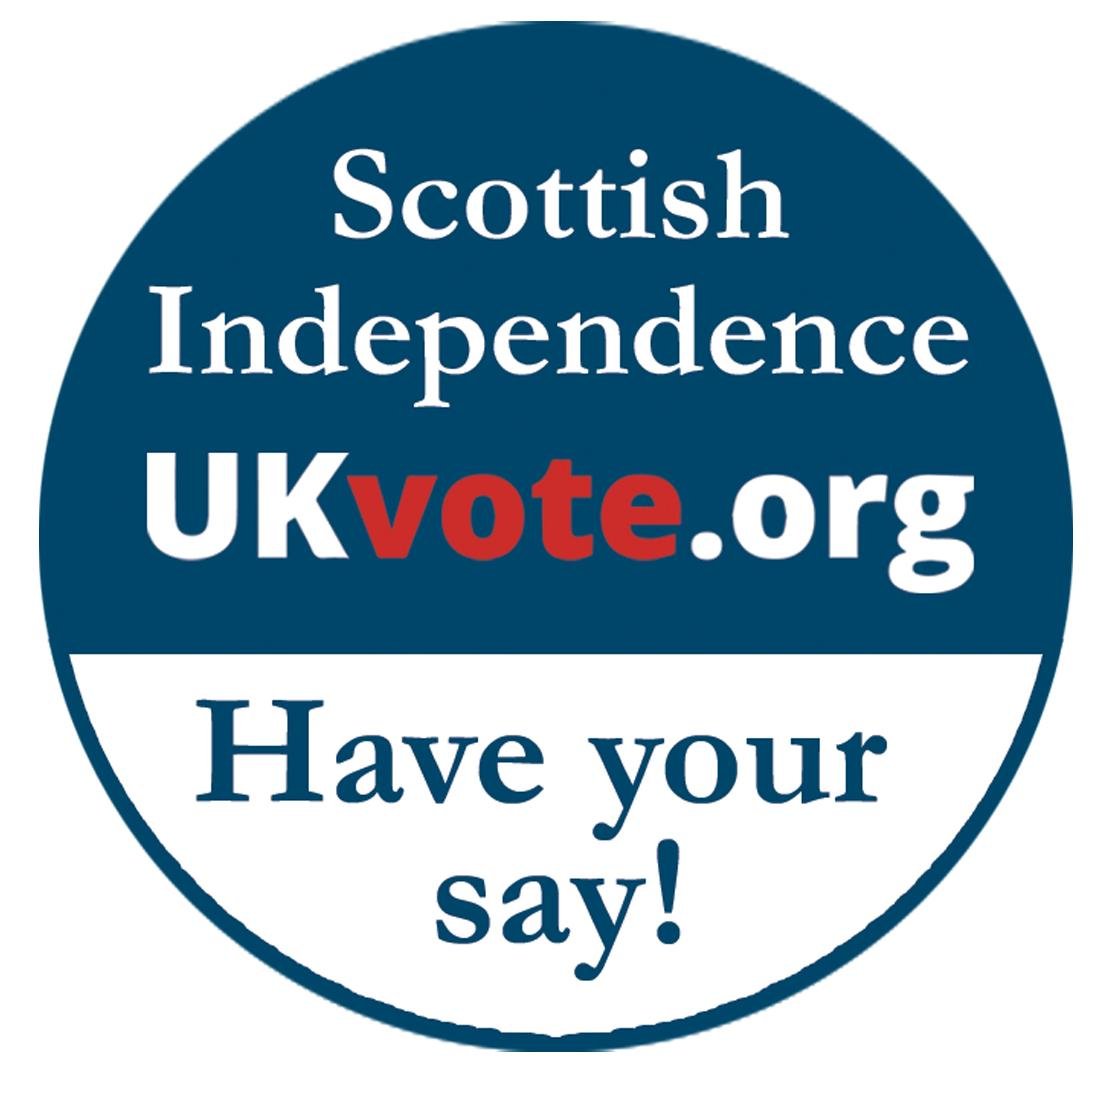 What is decided 18 Sept 2014, will affect you, but if you don’t live in Scotland, you can't vote. Open to everyone, cast your vote at http://t.co/t3uTcmlj4K